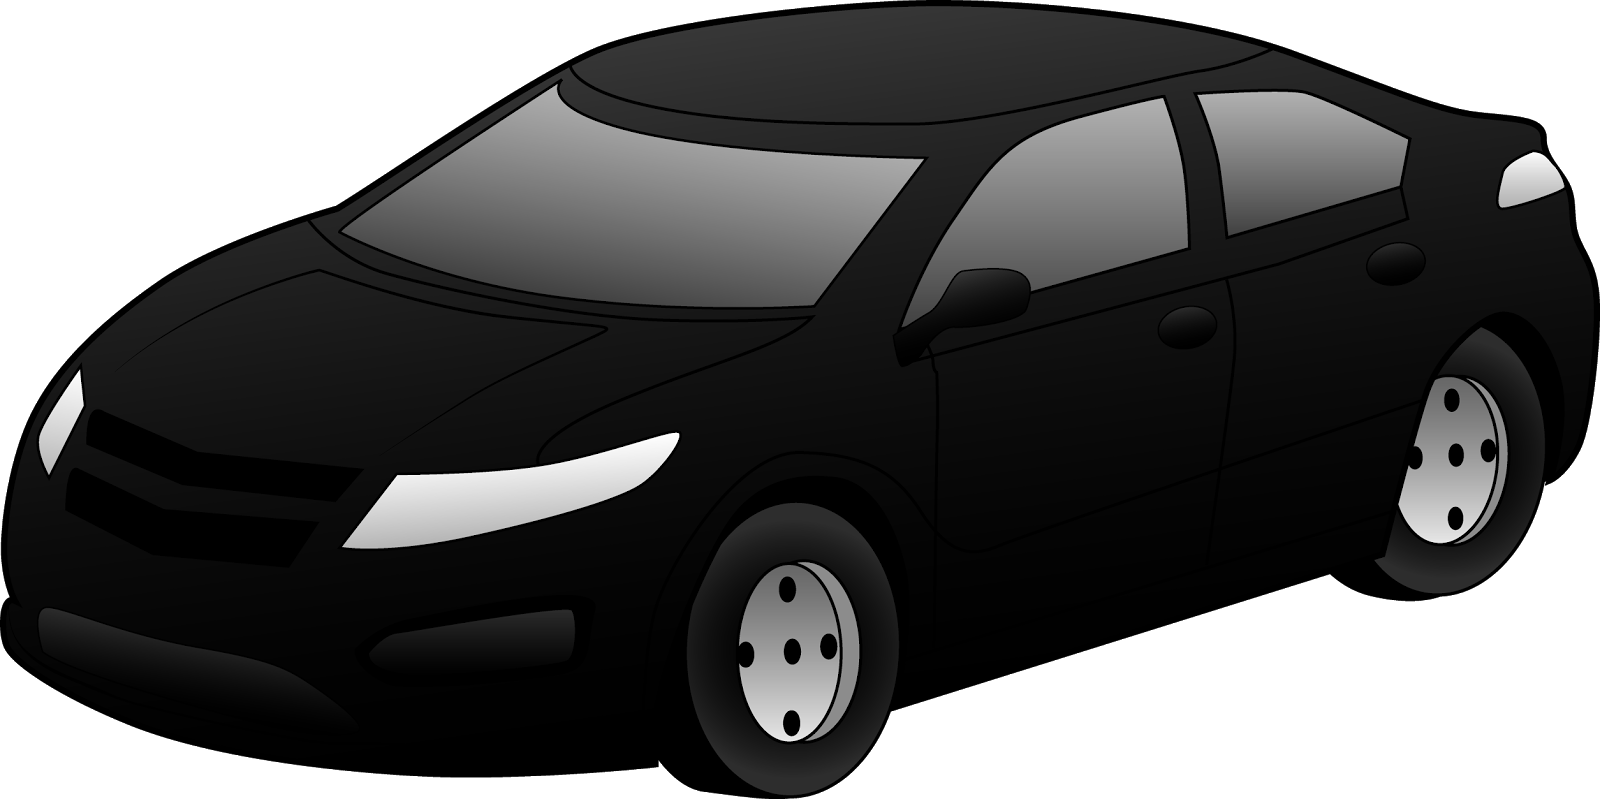 car clipart black and white - photo #43